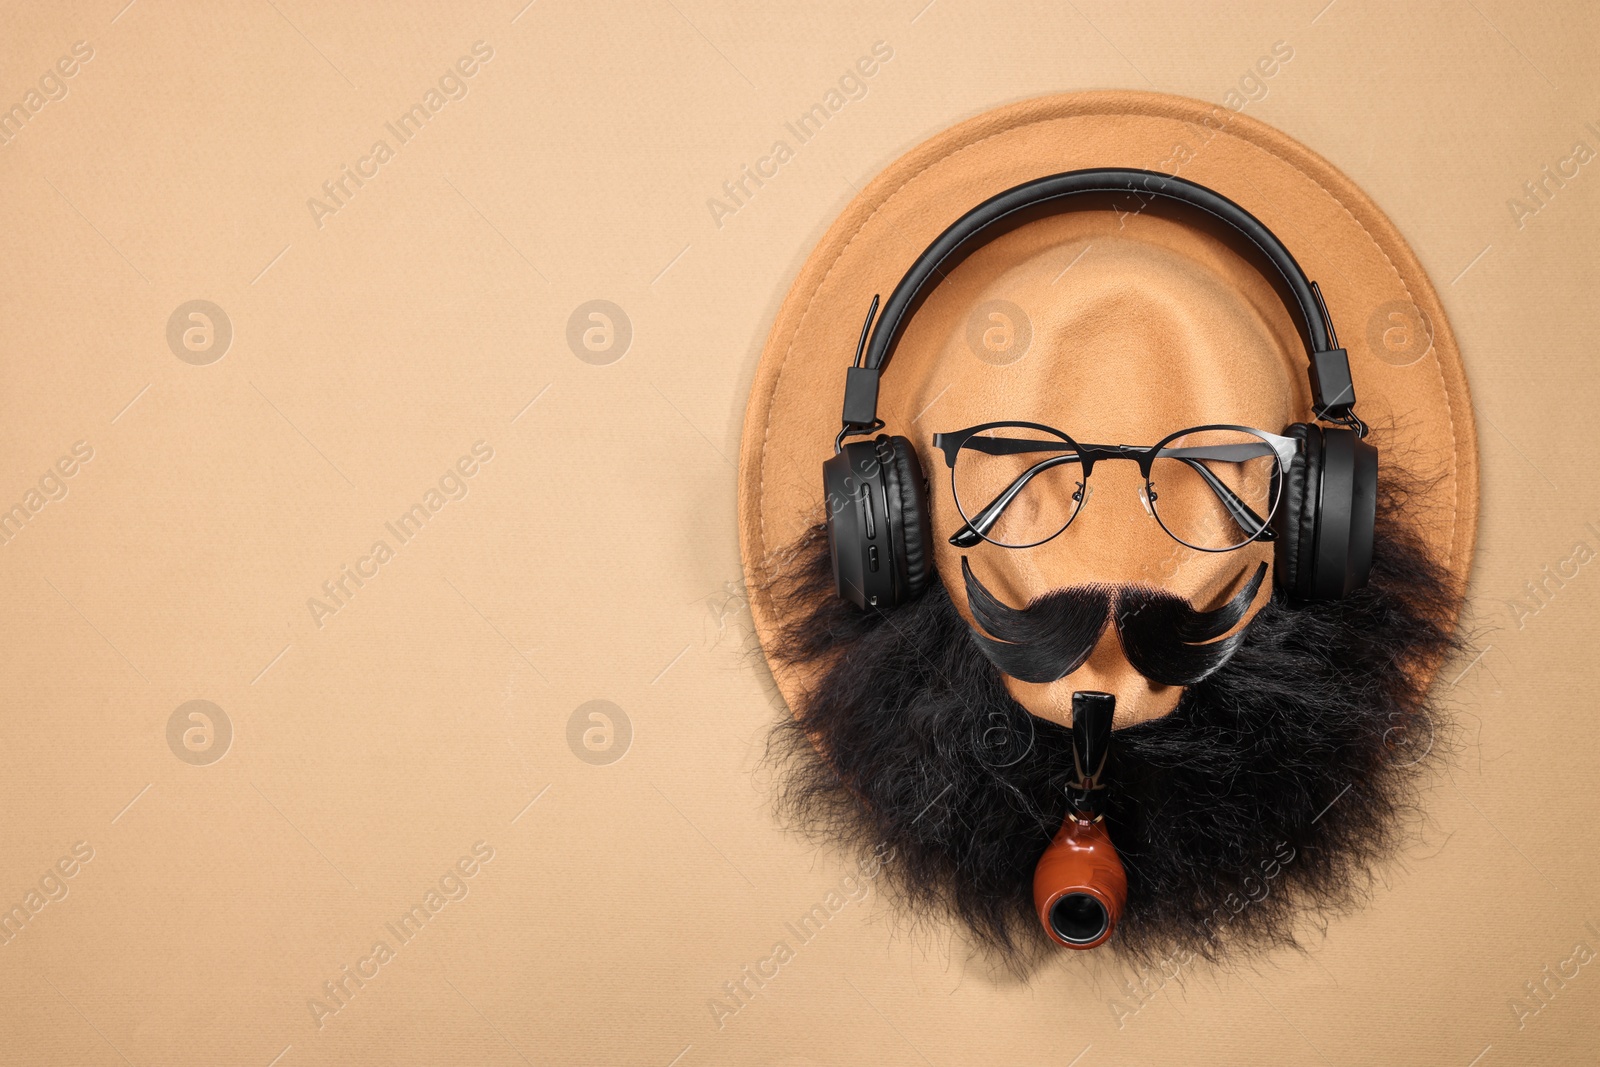 Photo of Man's face made of artificial mustache, beard, glasses and hat on beige background, top view. Space for text